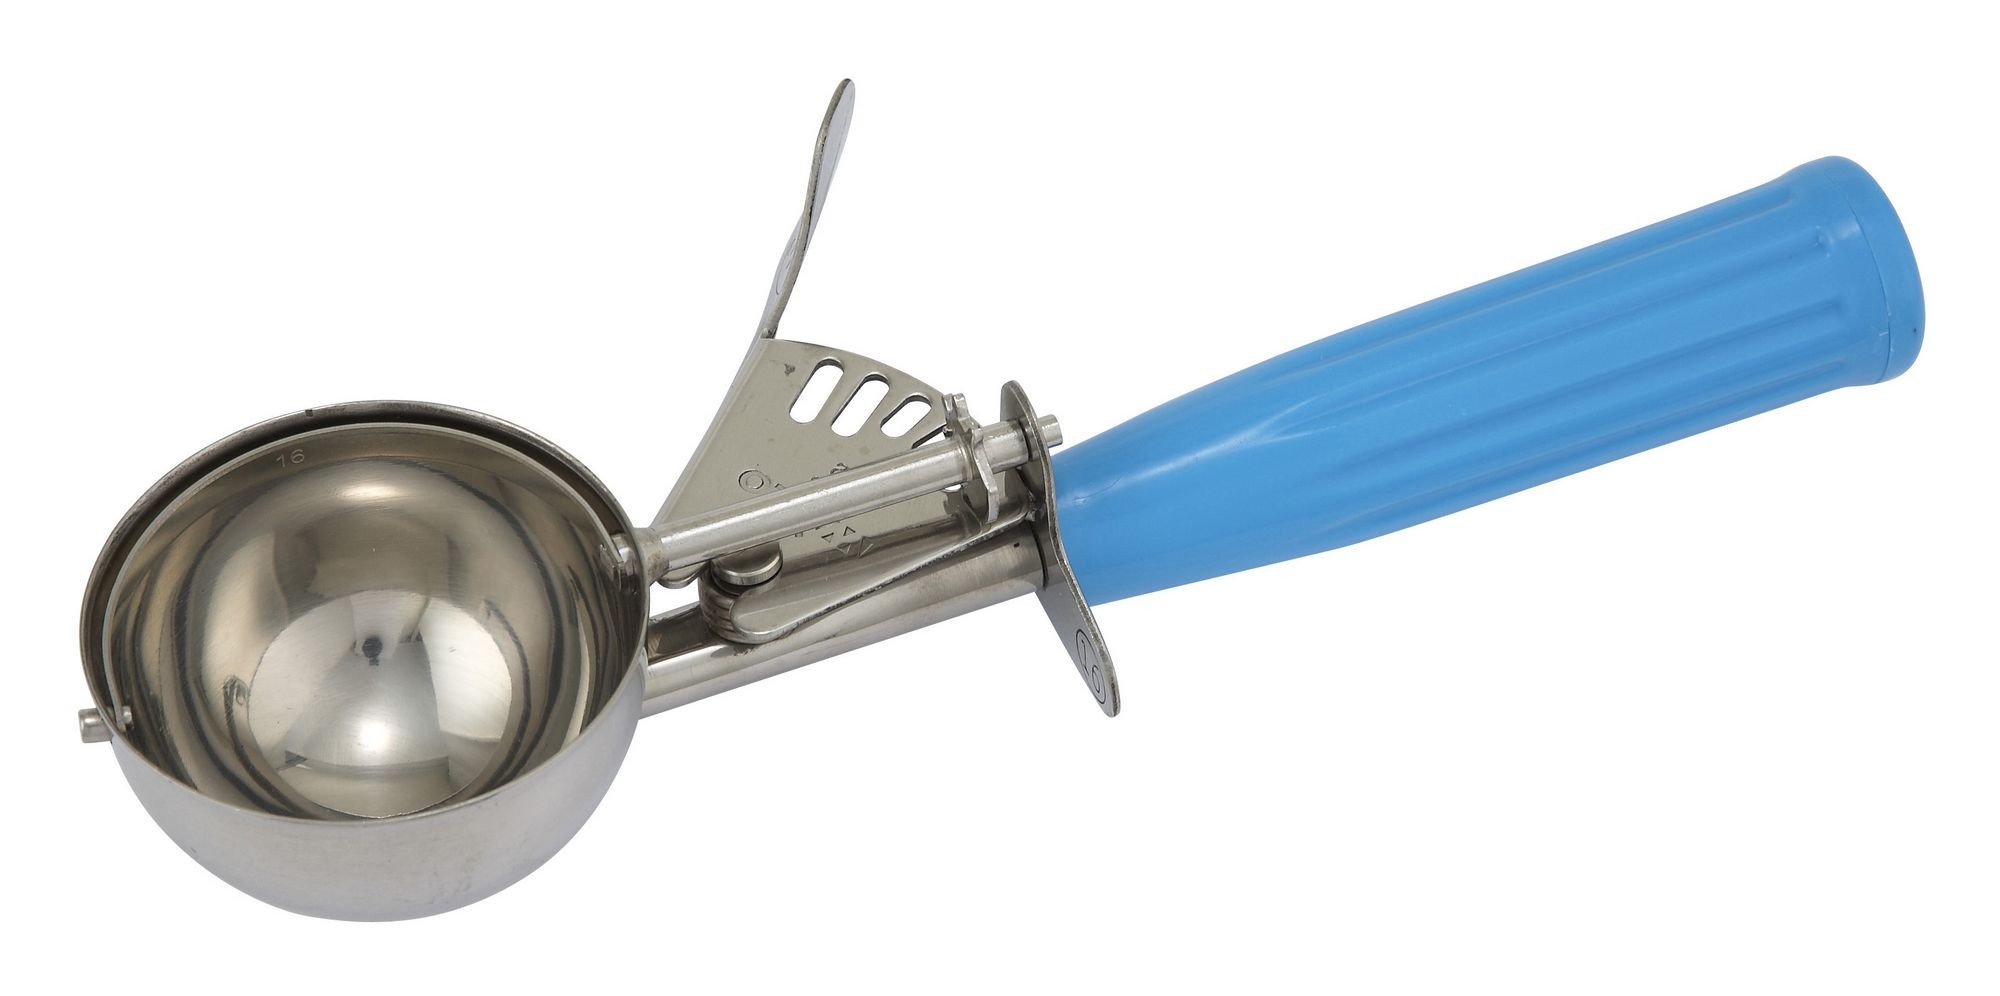 Winco ICD-16 Ice Cream Disher 2.75 oz. with Blue Plastic Handle Size 16